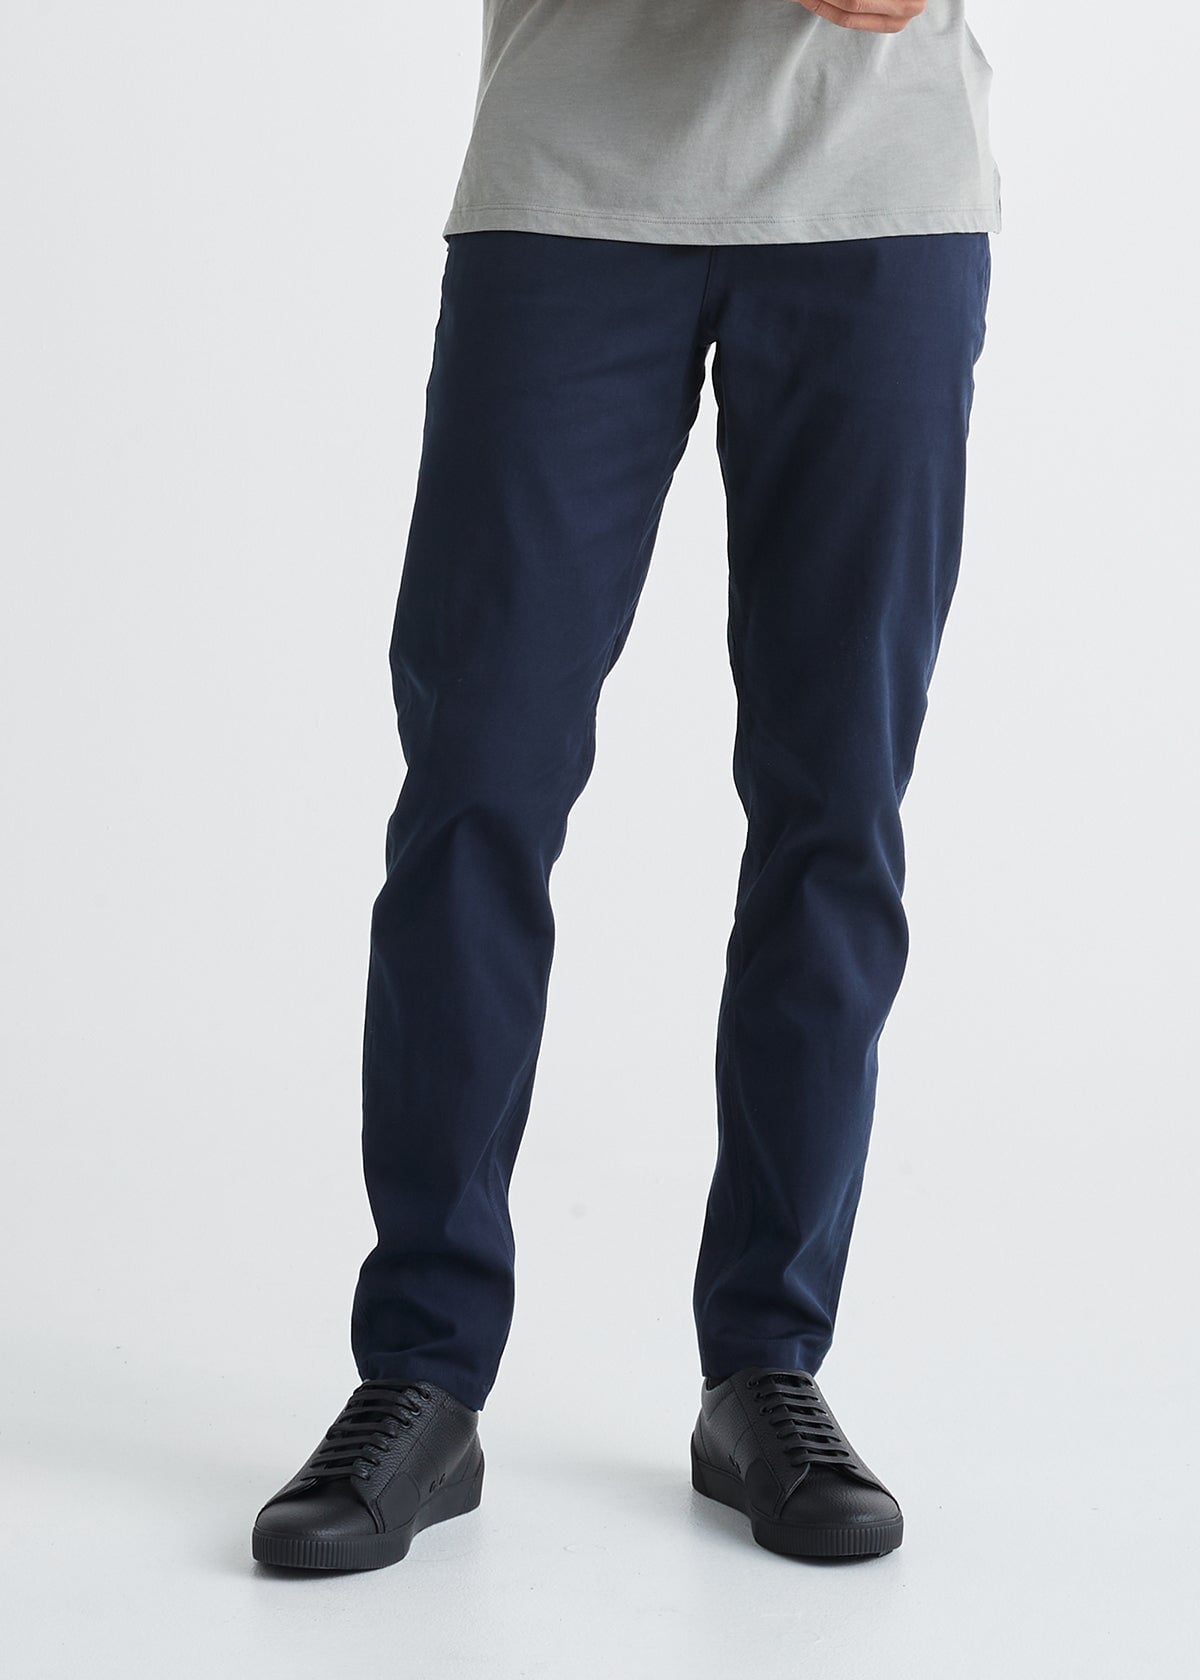 mens stretch deep blue chino pants front